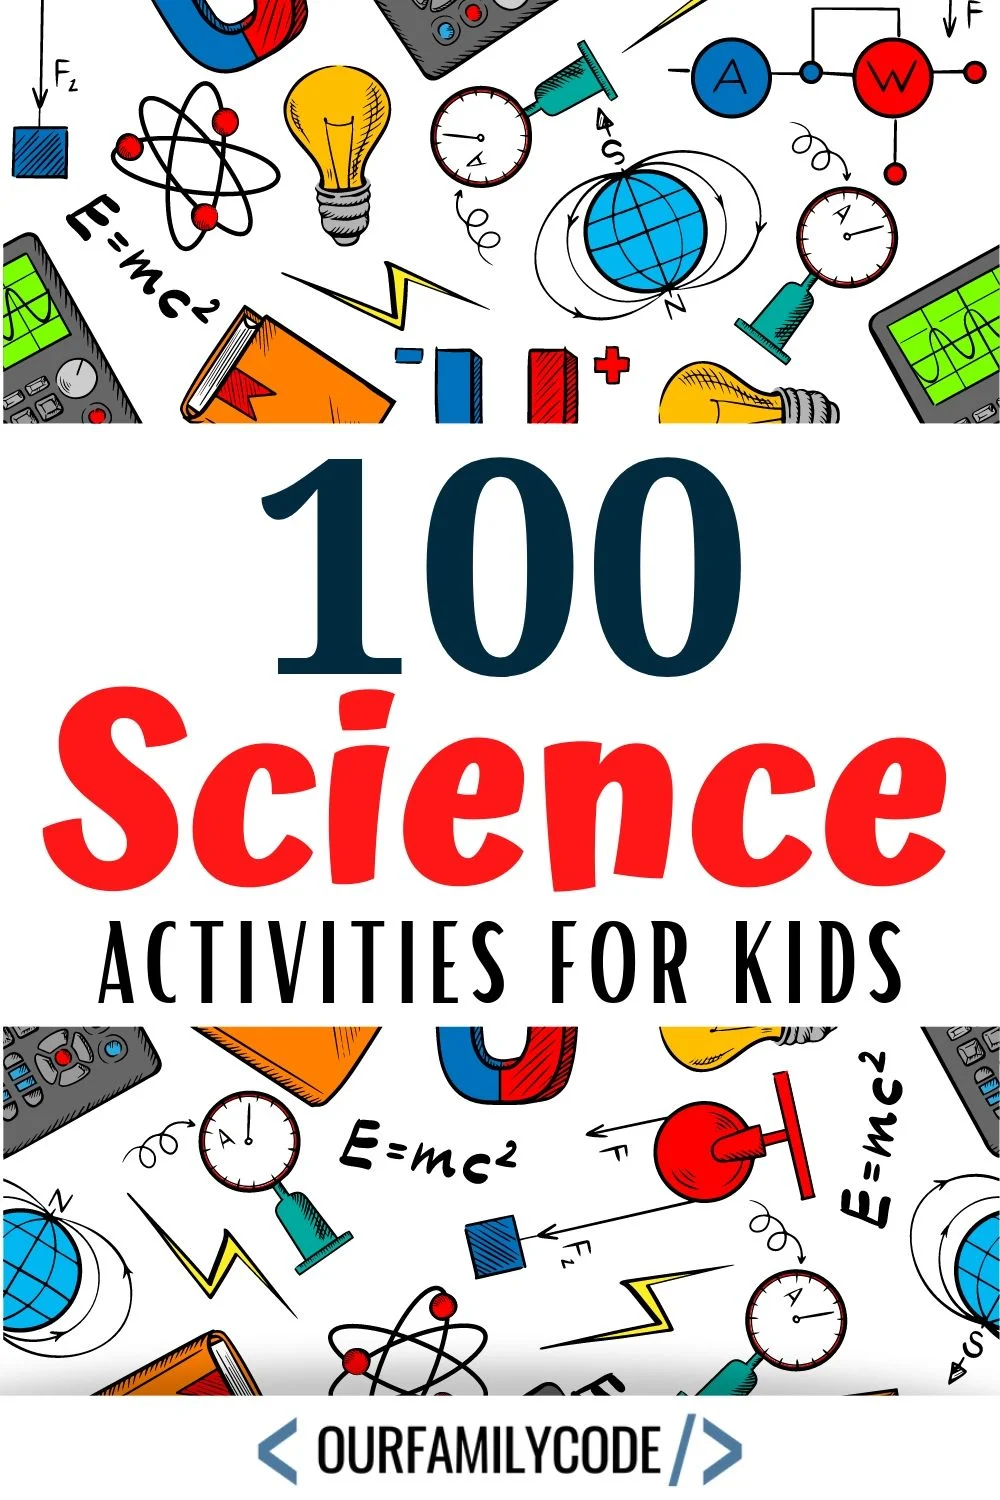 A picture of 100 science activities for kids written in text over a white background with science images.